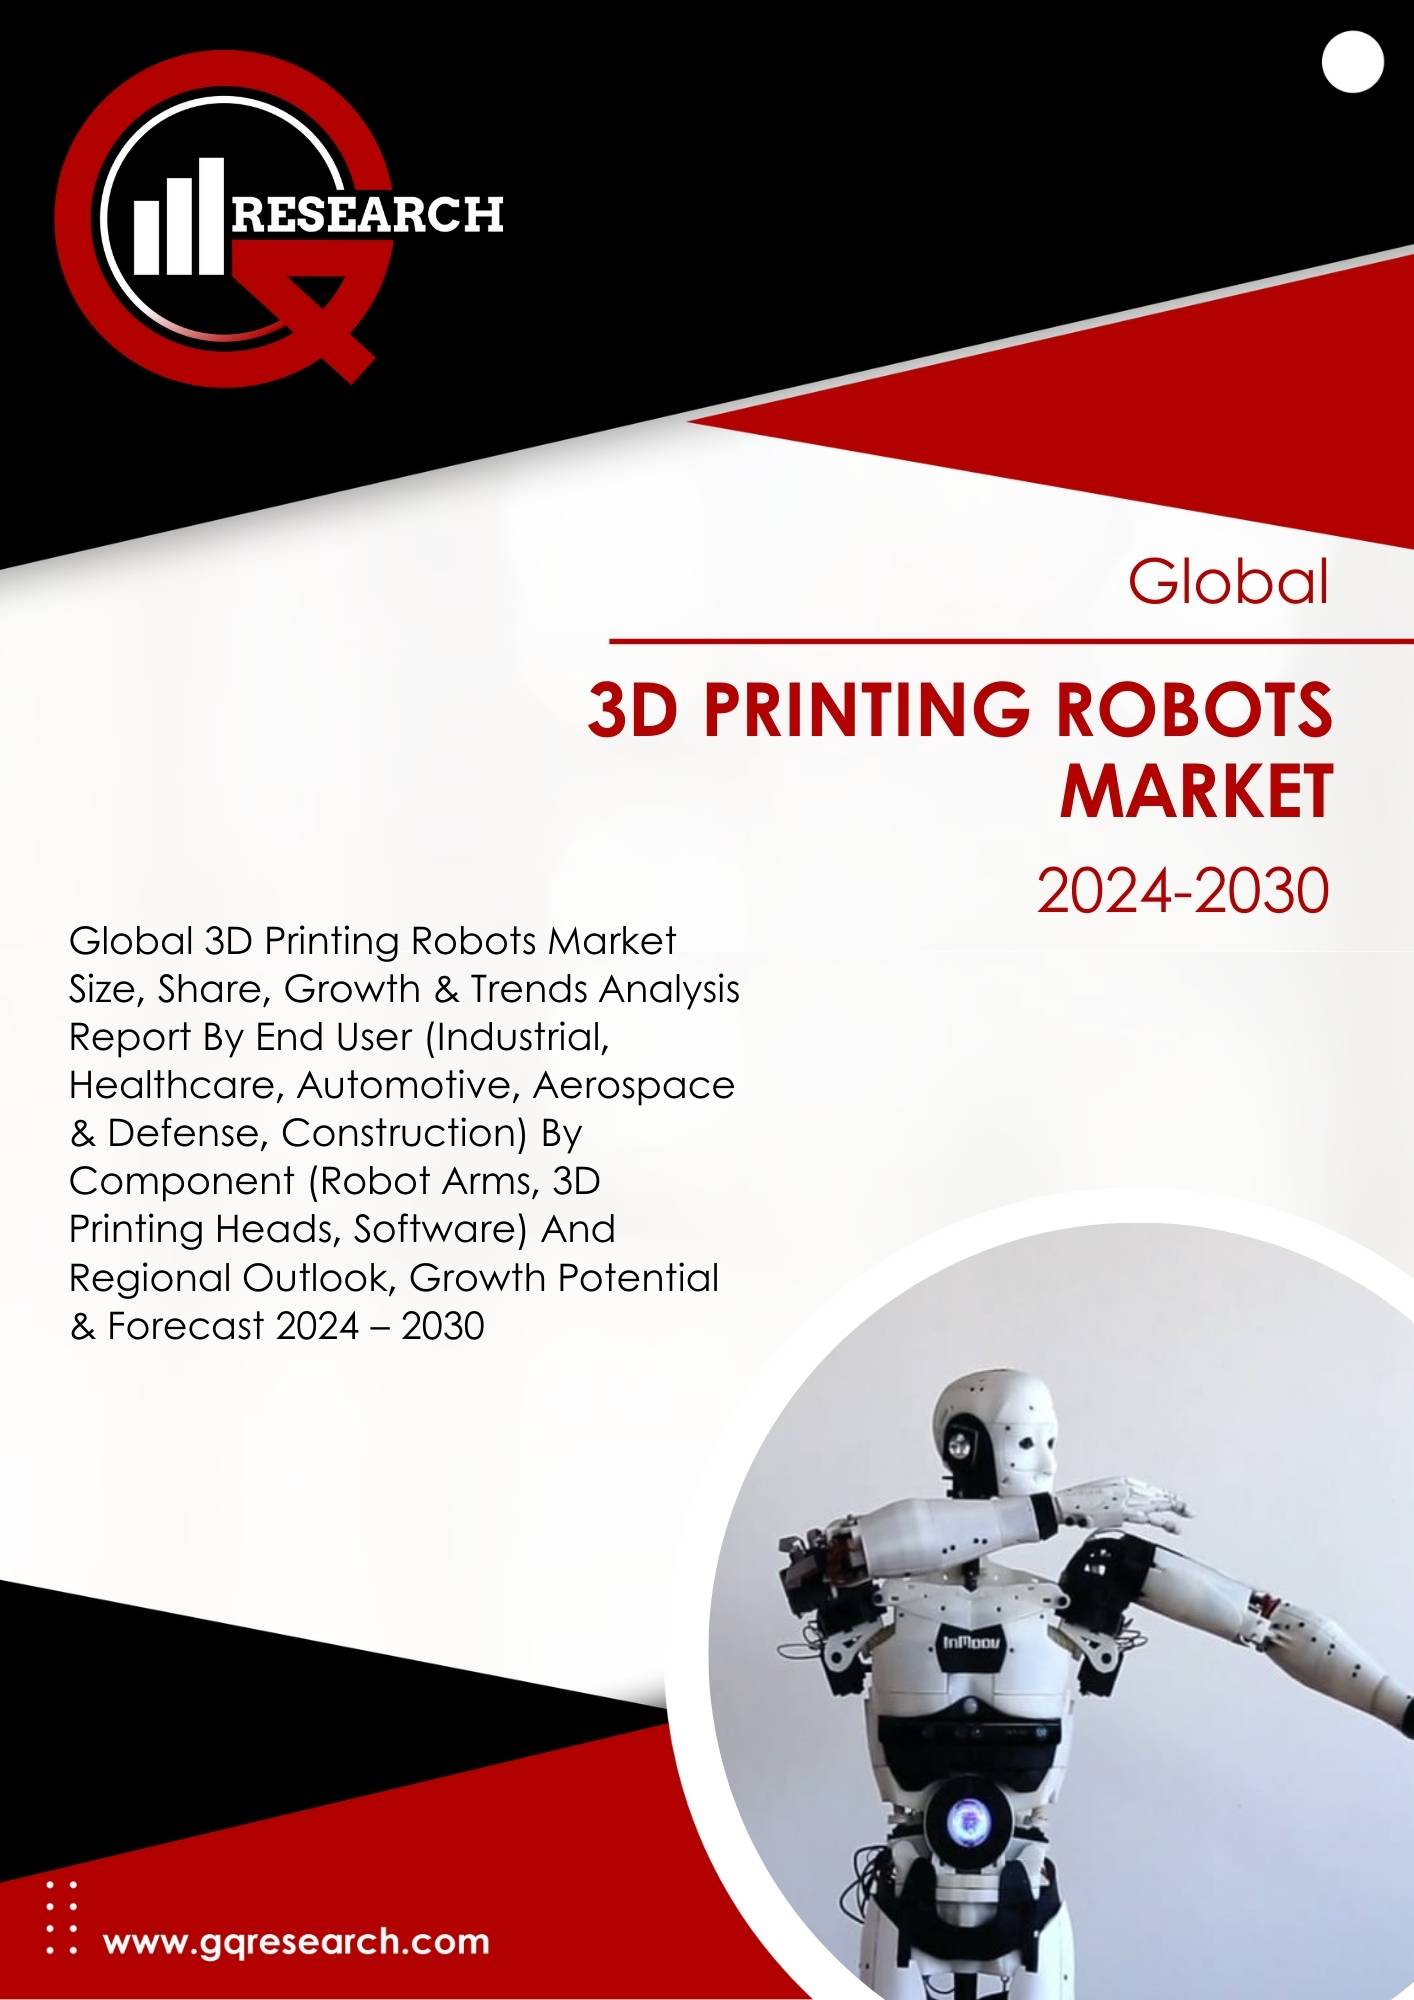 Global 3D Printing Robots Market Growth & Trends Analysis Report Forecast BY 2030 | GQ Research